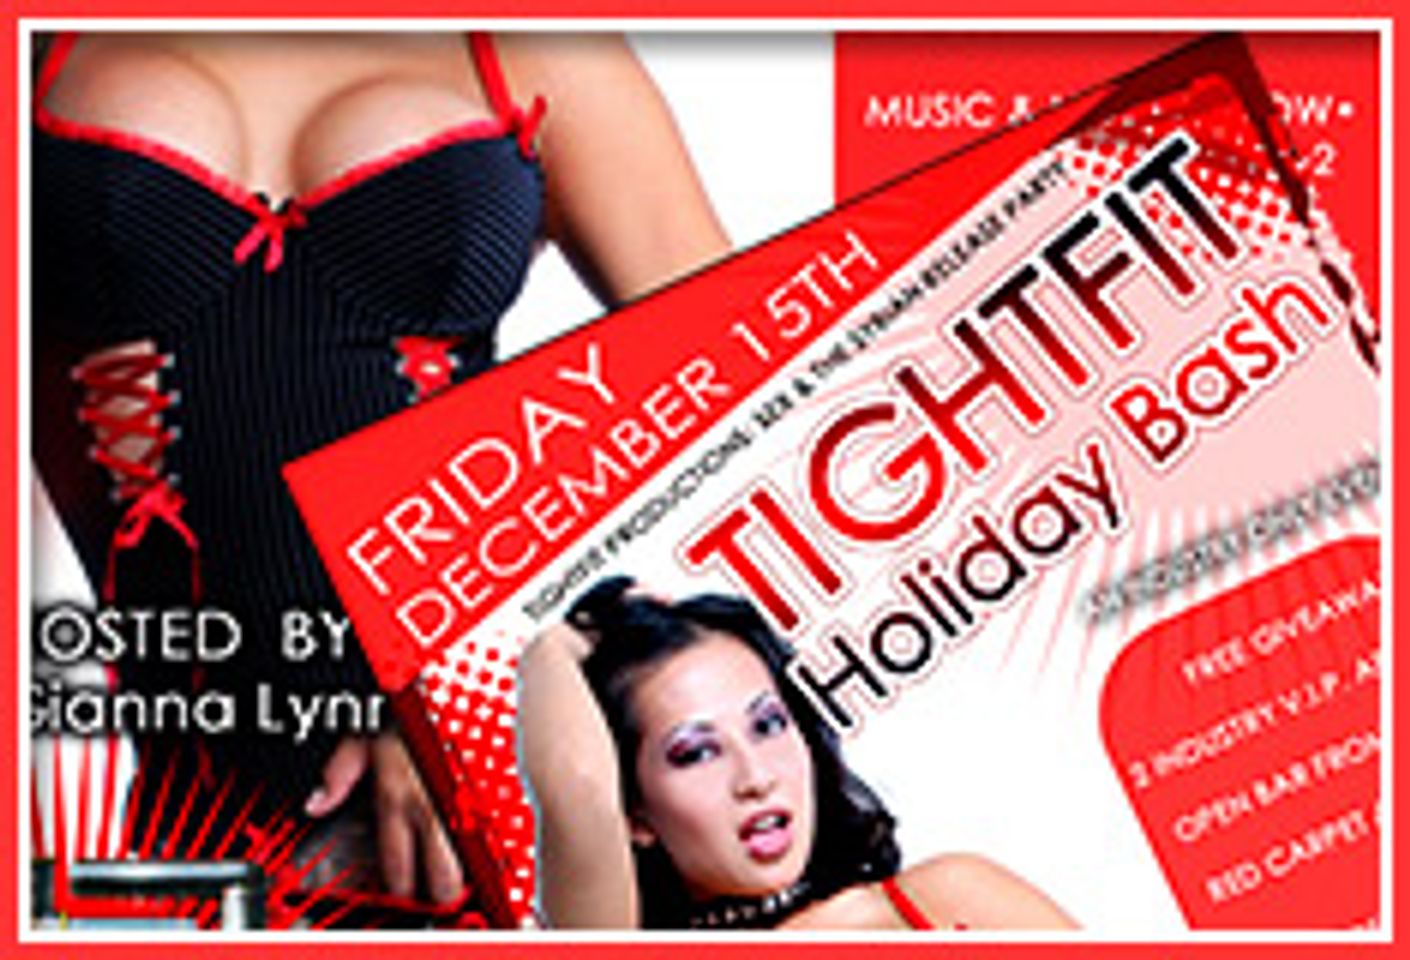 Tightfit's Holiday Party Set for Friday